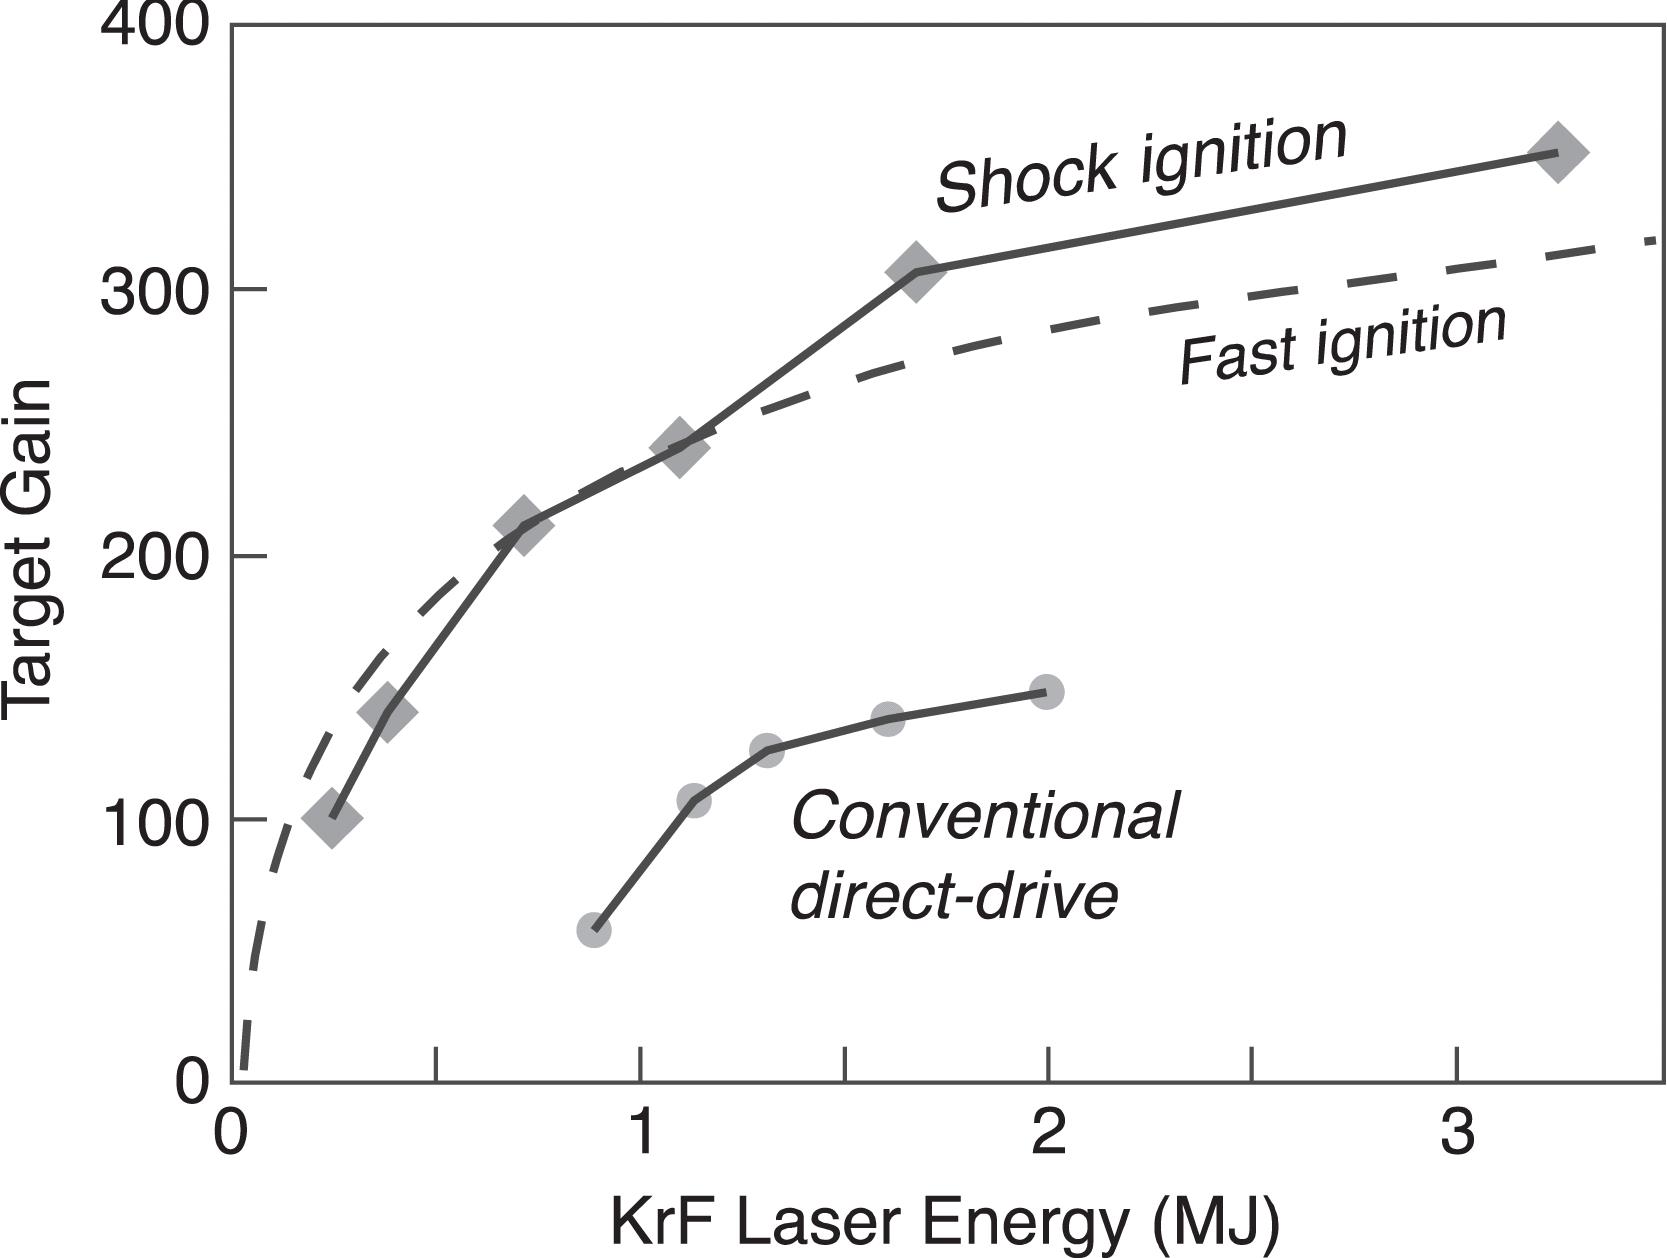 Predicted target energy gains versus incident laser energy for several designs. Shock-ignition gains are similar to fast-ignition target gains, and KrF lasers have superior performance due to their shorter laser wavelength and the ability to reduce the focal spot size to match the imploding target.